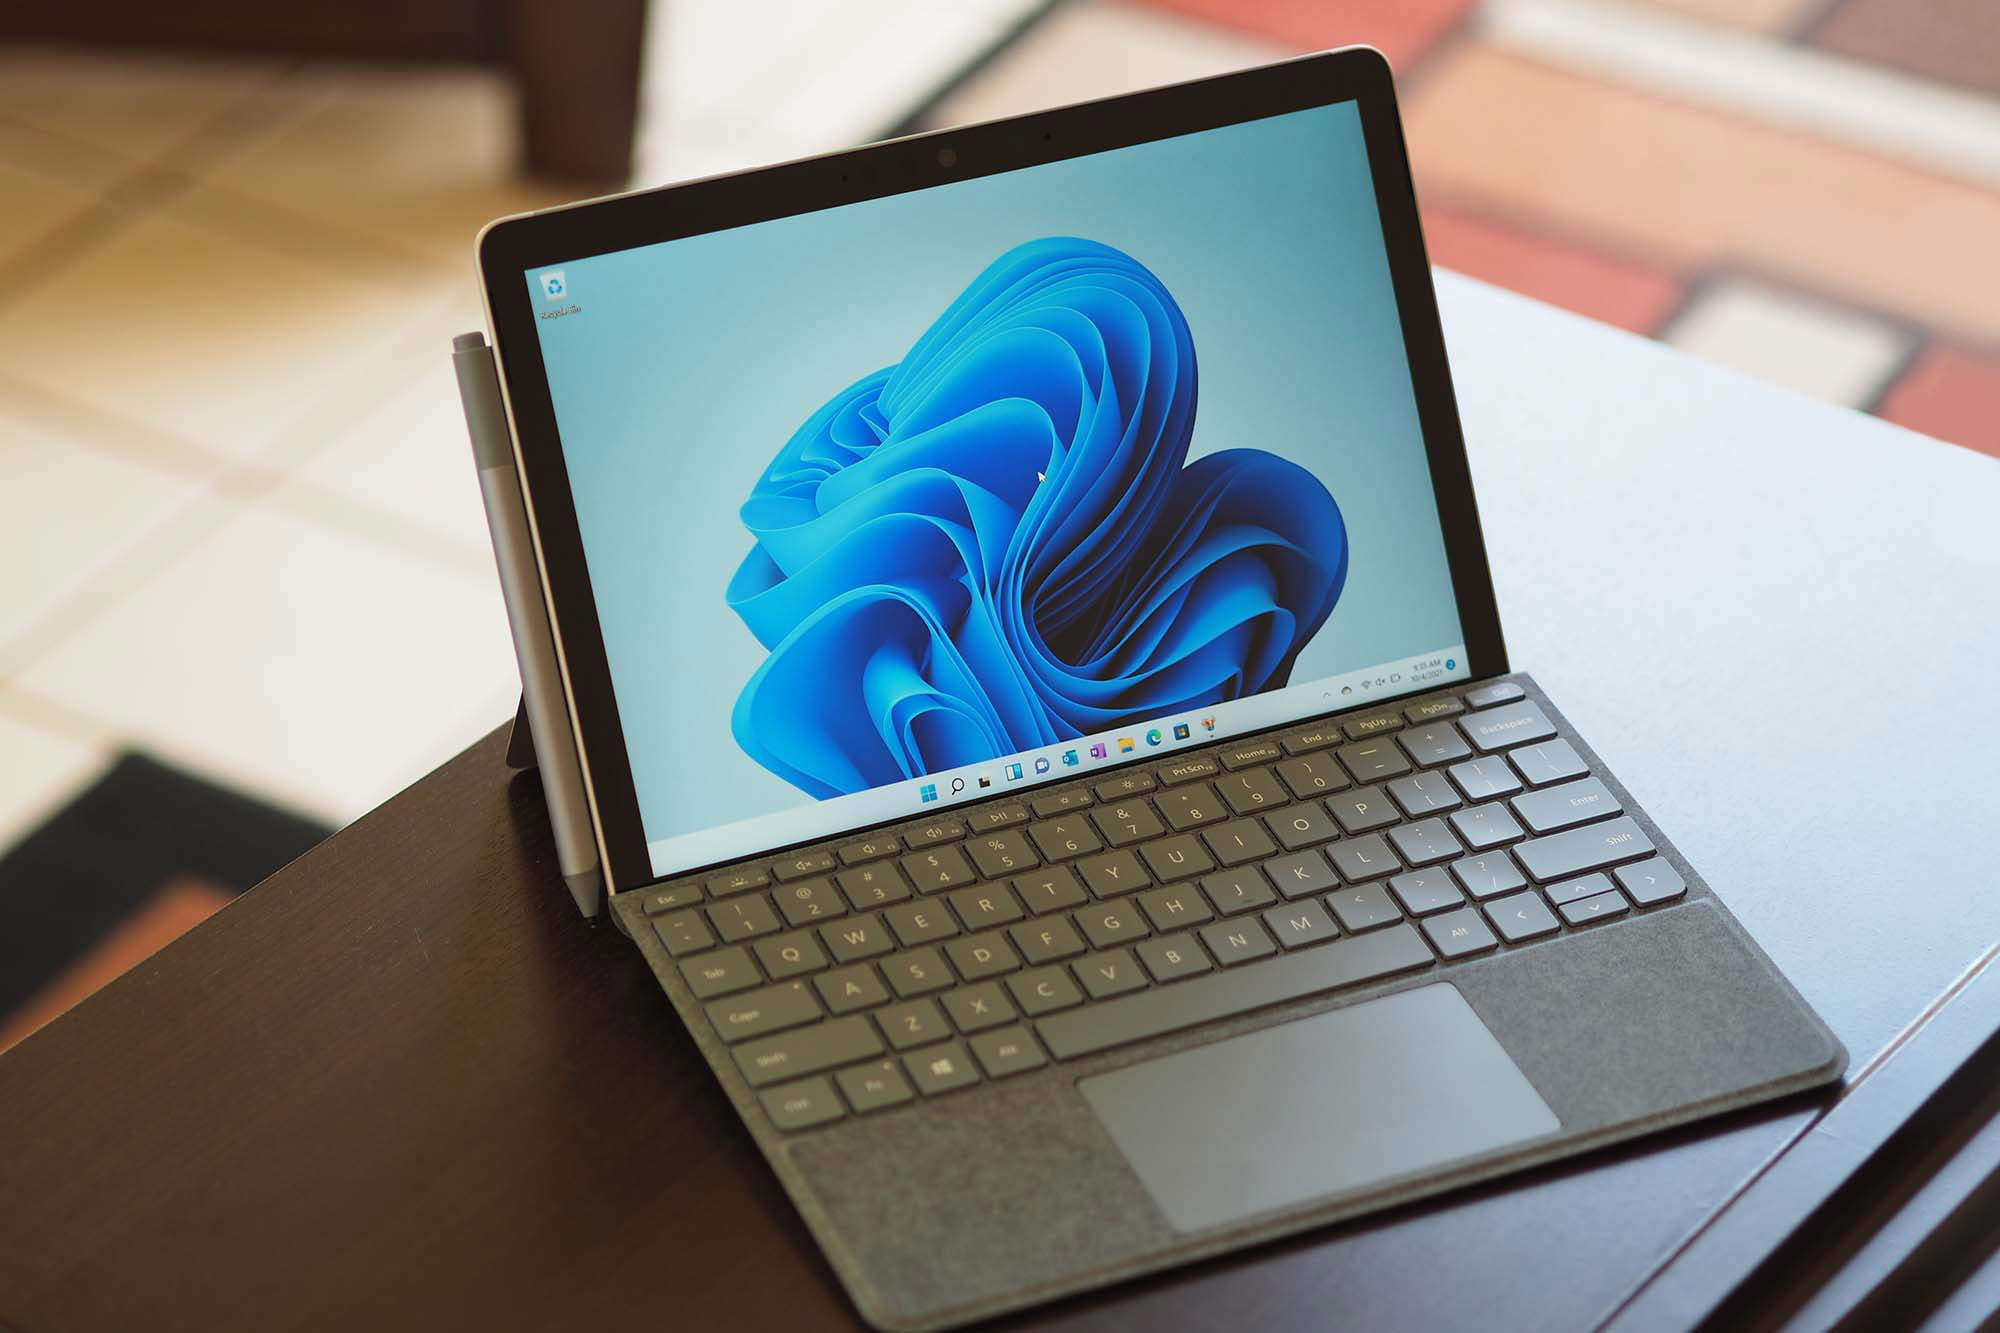 Microsoft surface go 3 with blue wallpaper on top of a wooden table